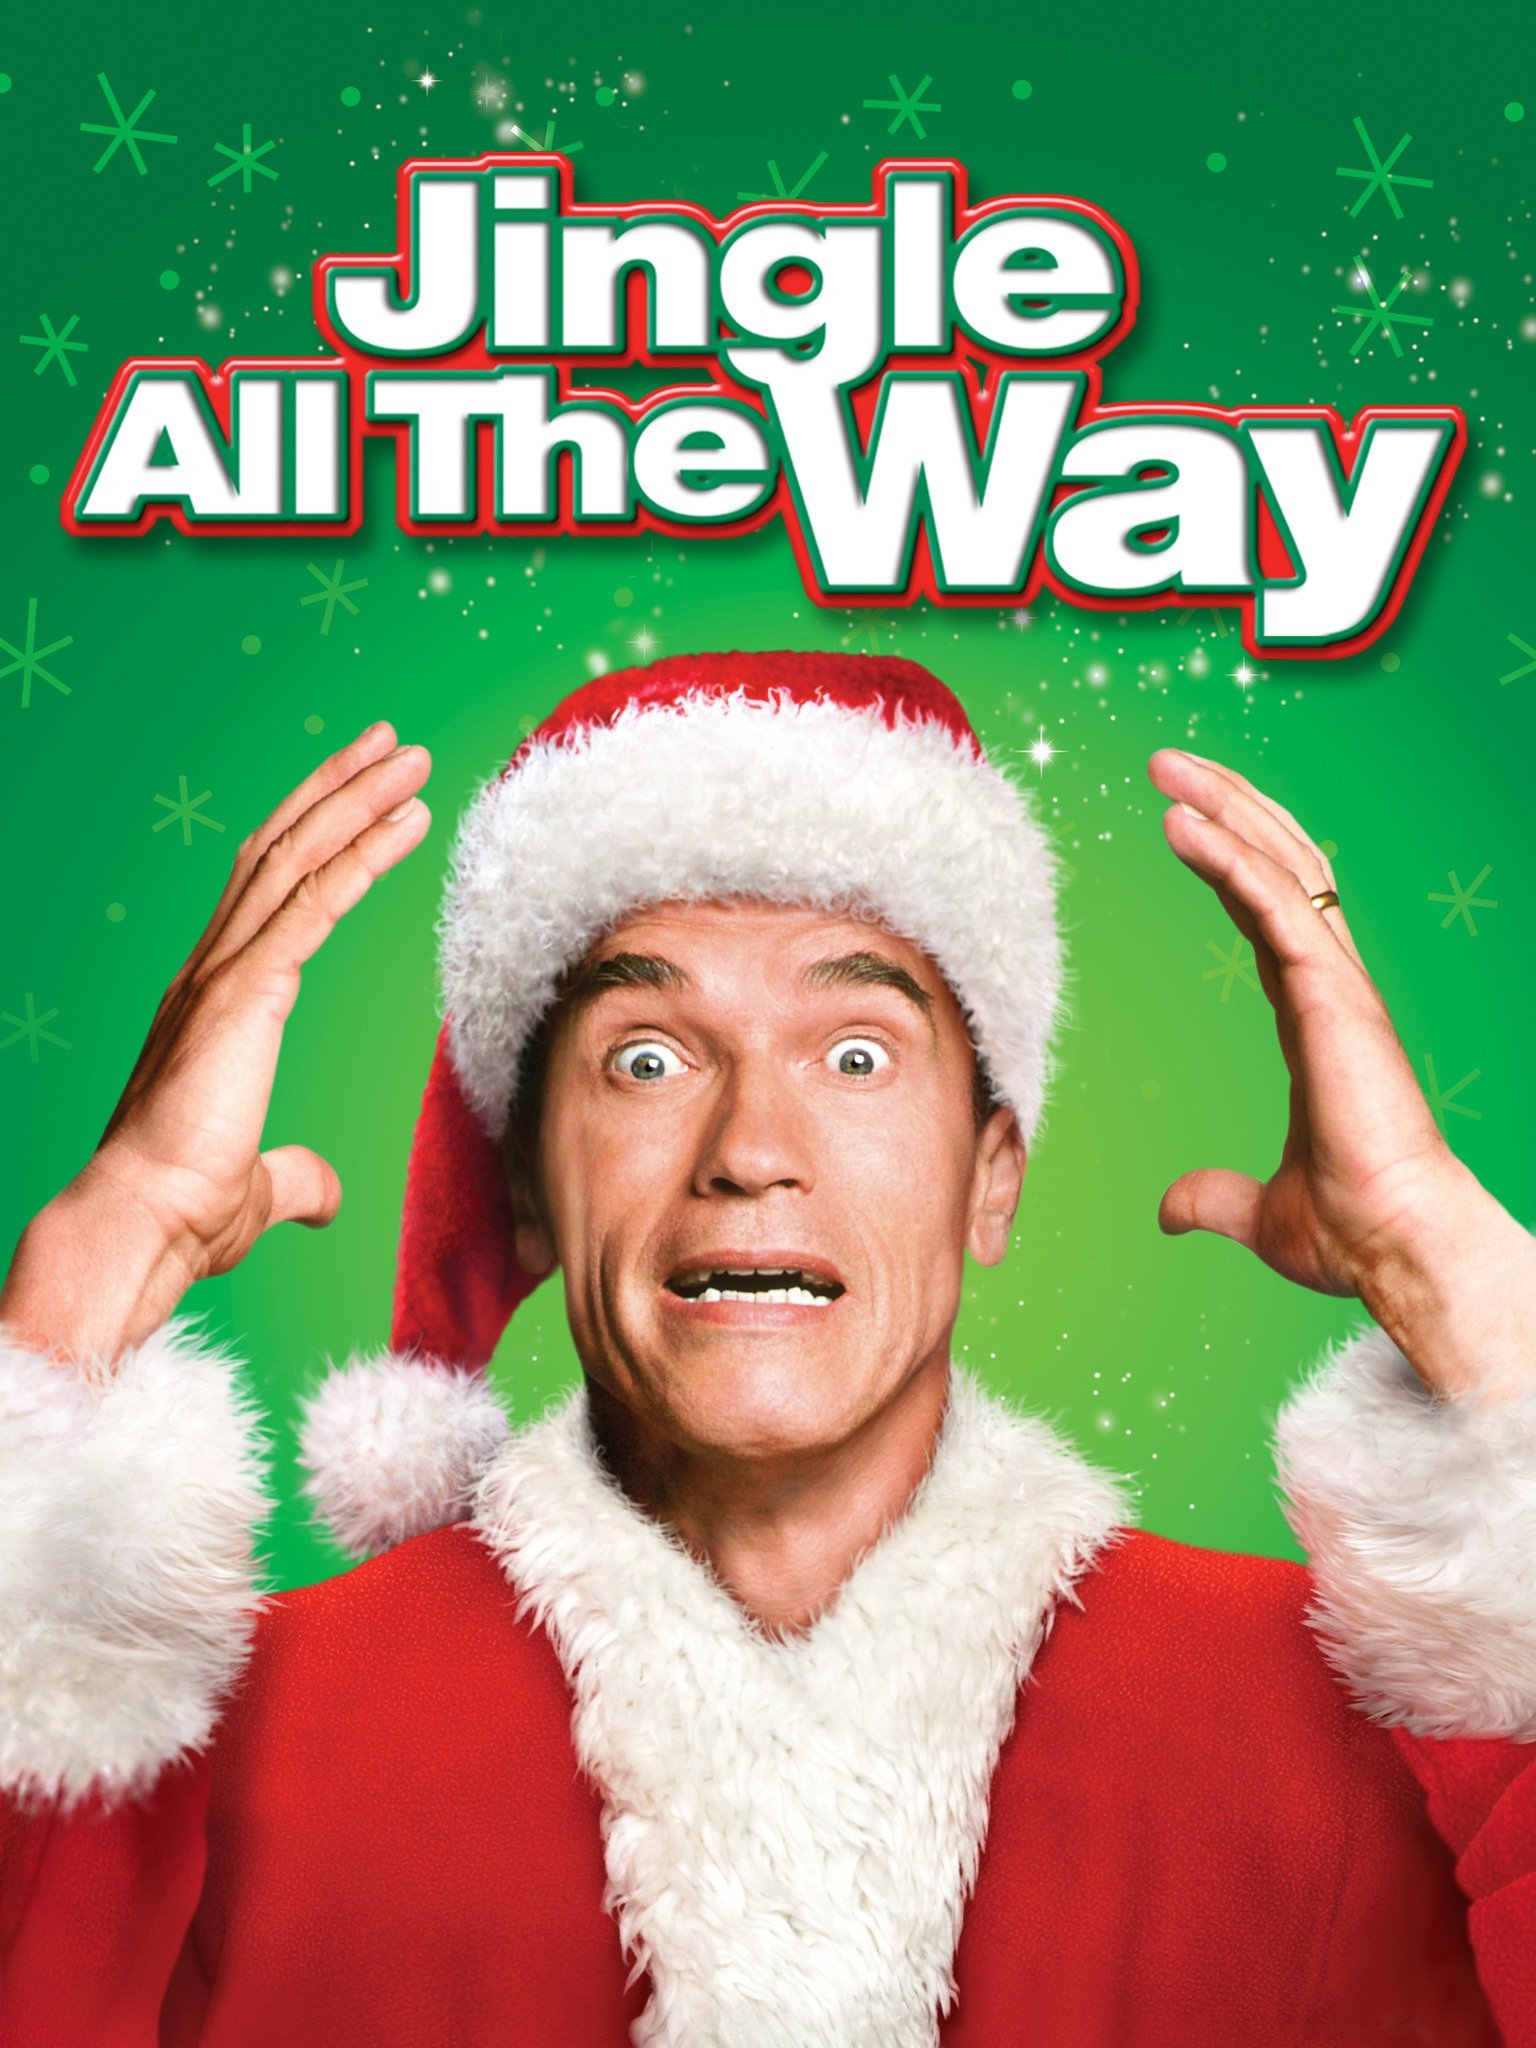 jingle-all-the-way-trailer-1-trailers-videos-rotten-tomatoes